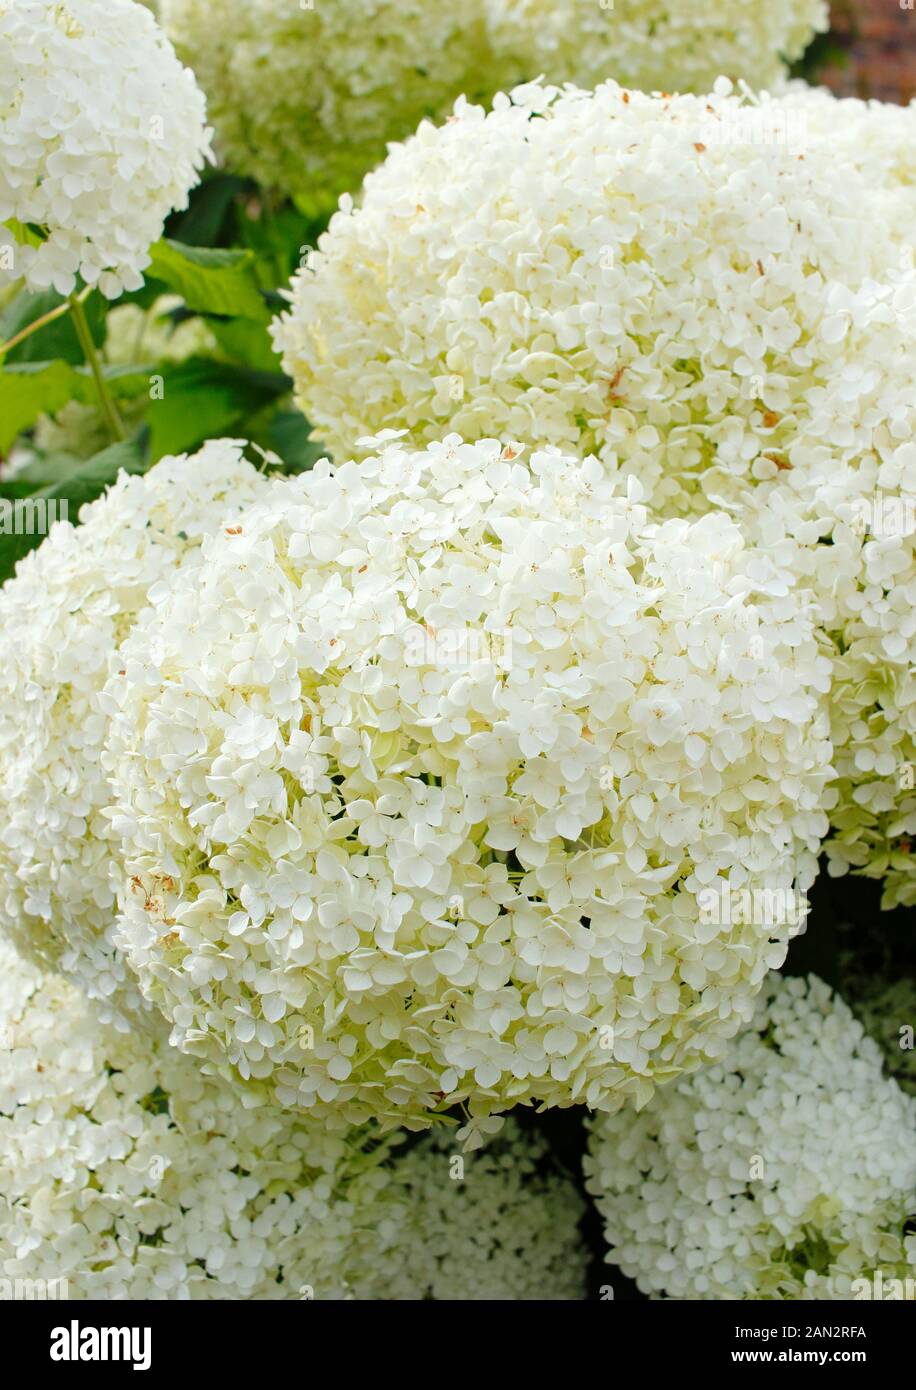 Hydrangea arborescens 'Annabelle' displaying distinctive large white  flower clusters. AGM Stock Photo